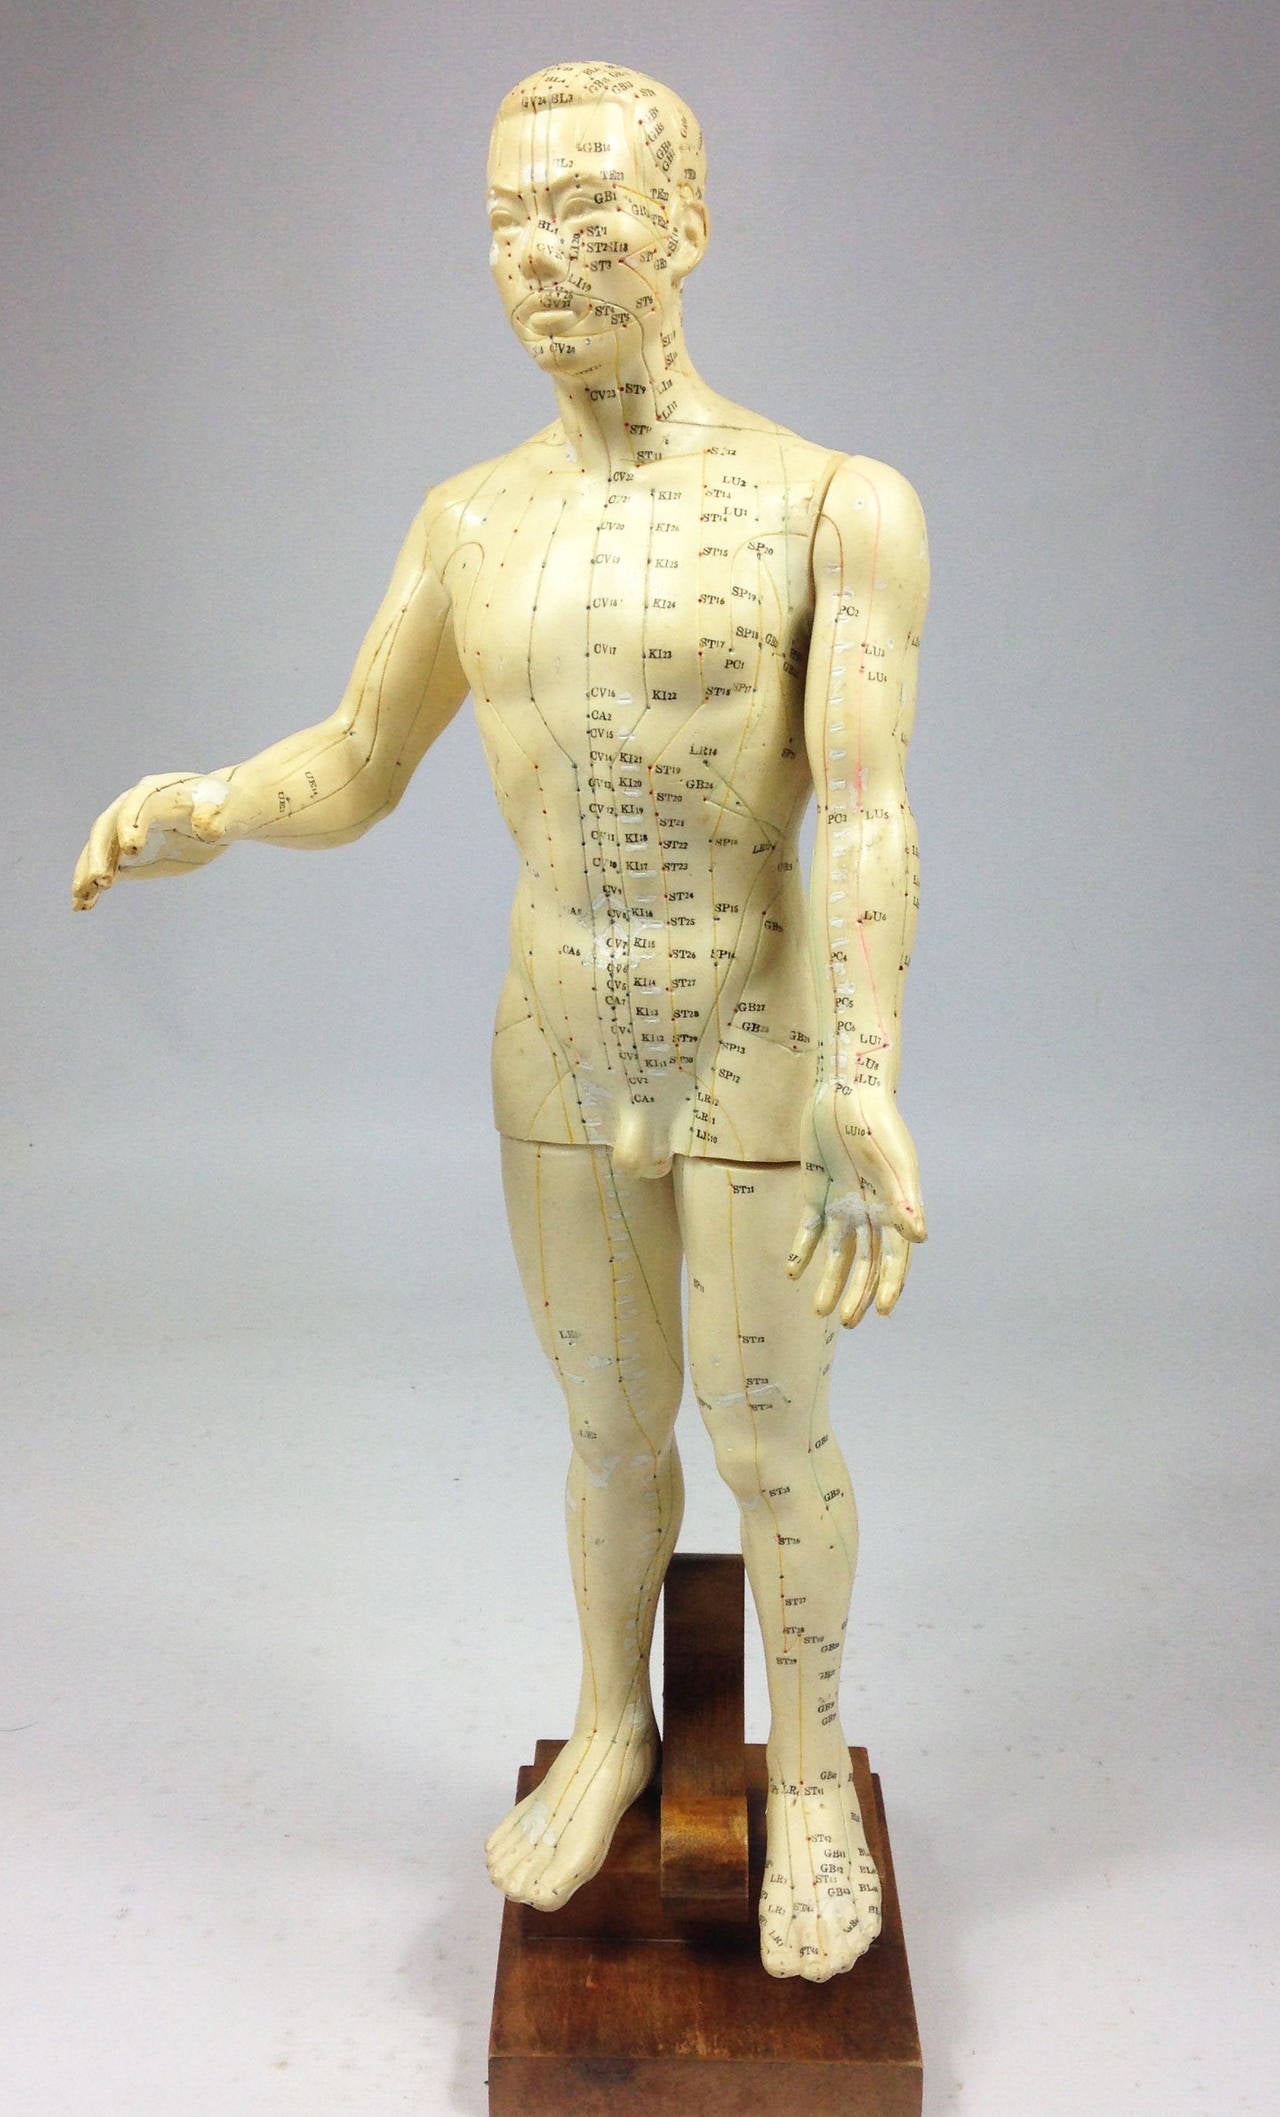 A very decorative mid 20th century Japanese acupuncture doll. Constructed of durable rubber which is mapped out to show the various areas acupuncture points of the body. White correction fluid has been added by the original owner - probably to aid